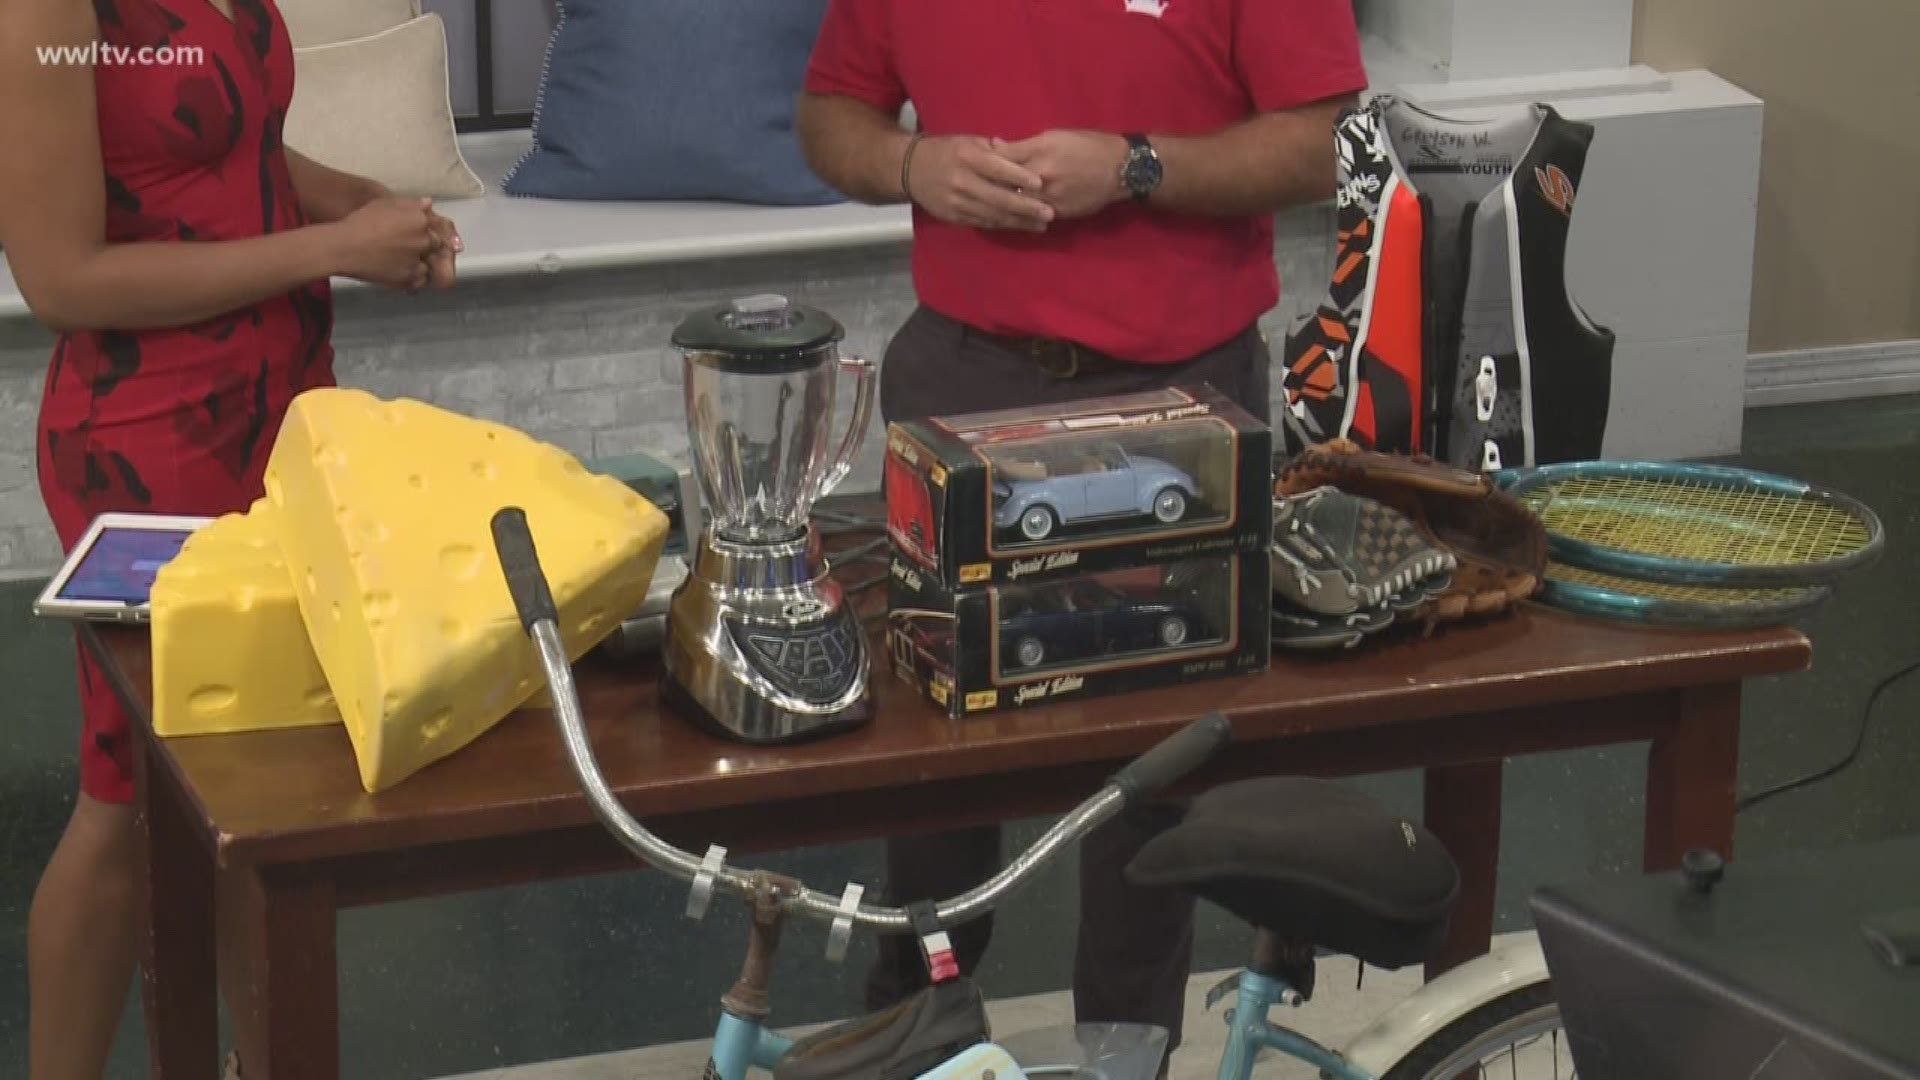 Miller Gunn, owner of Junk King New Orleans, is here with some tips to de-clutter.